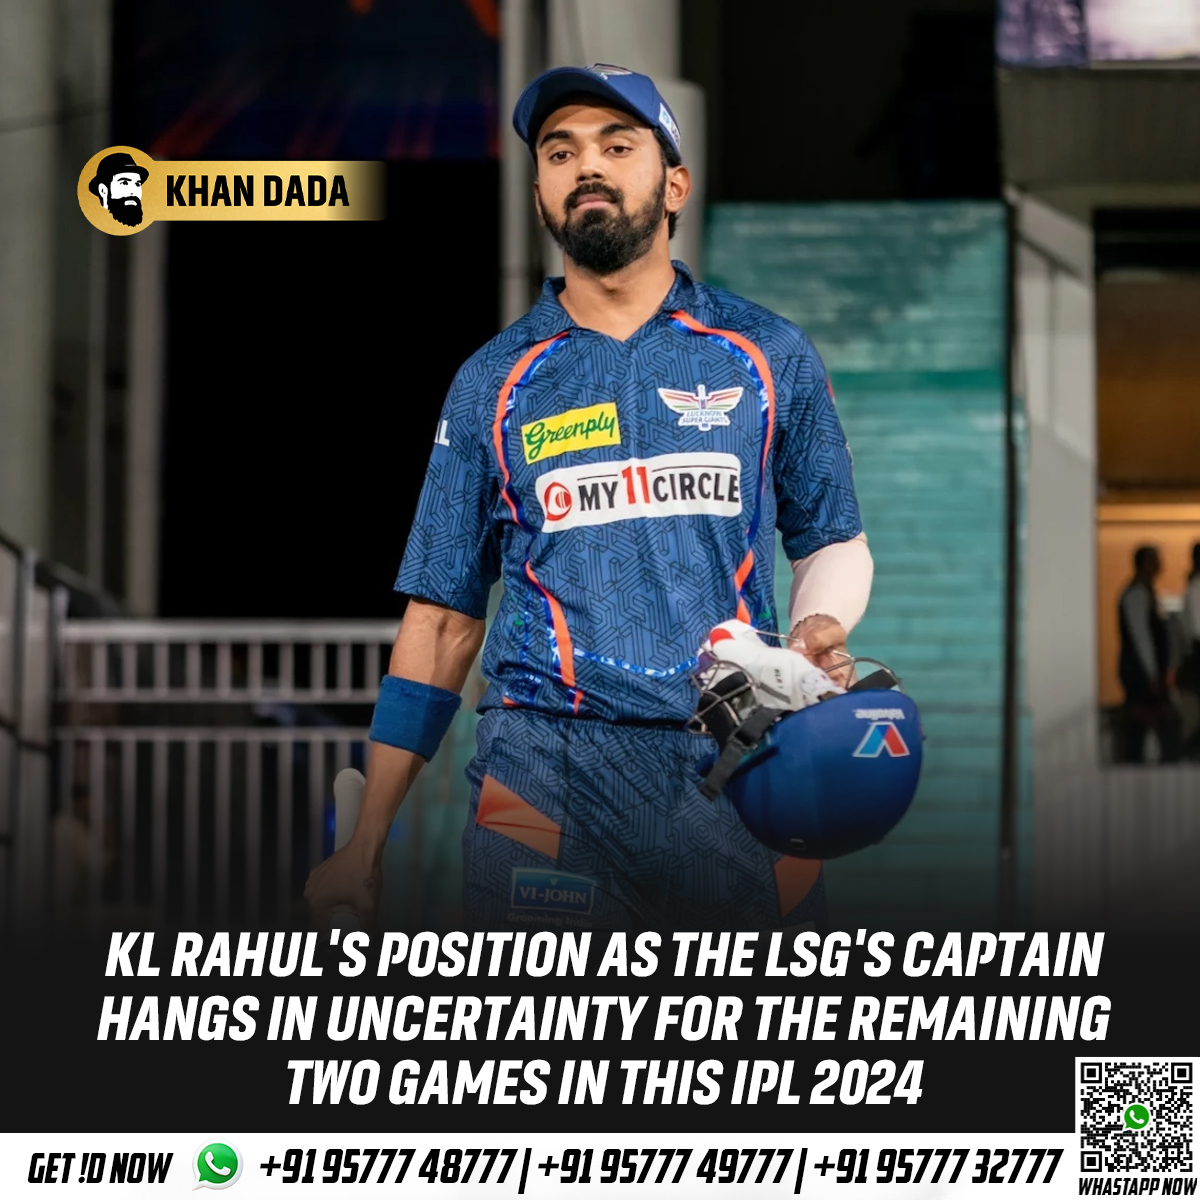 KL Rahul's position as the LSG's Captain hangs in uncertainty for the remaining two games in this IPL 2024.😎🏏 #KLRahul #LSG2024 #RohitSharma𓃵 #MumbaiIndiansFans #LasithMalinga #ishankishan #SunnyDeol #CSKvsRR #Puri #Laga #NDTV #DHANDHOMVOUTTODAY #FahadhFaasil #Aavesham